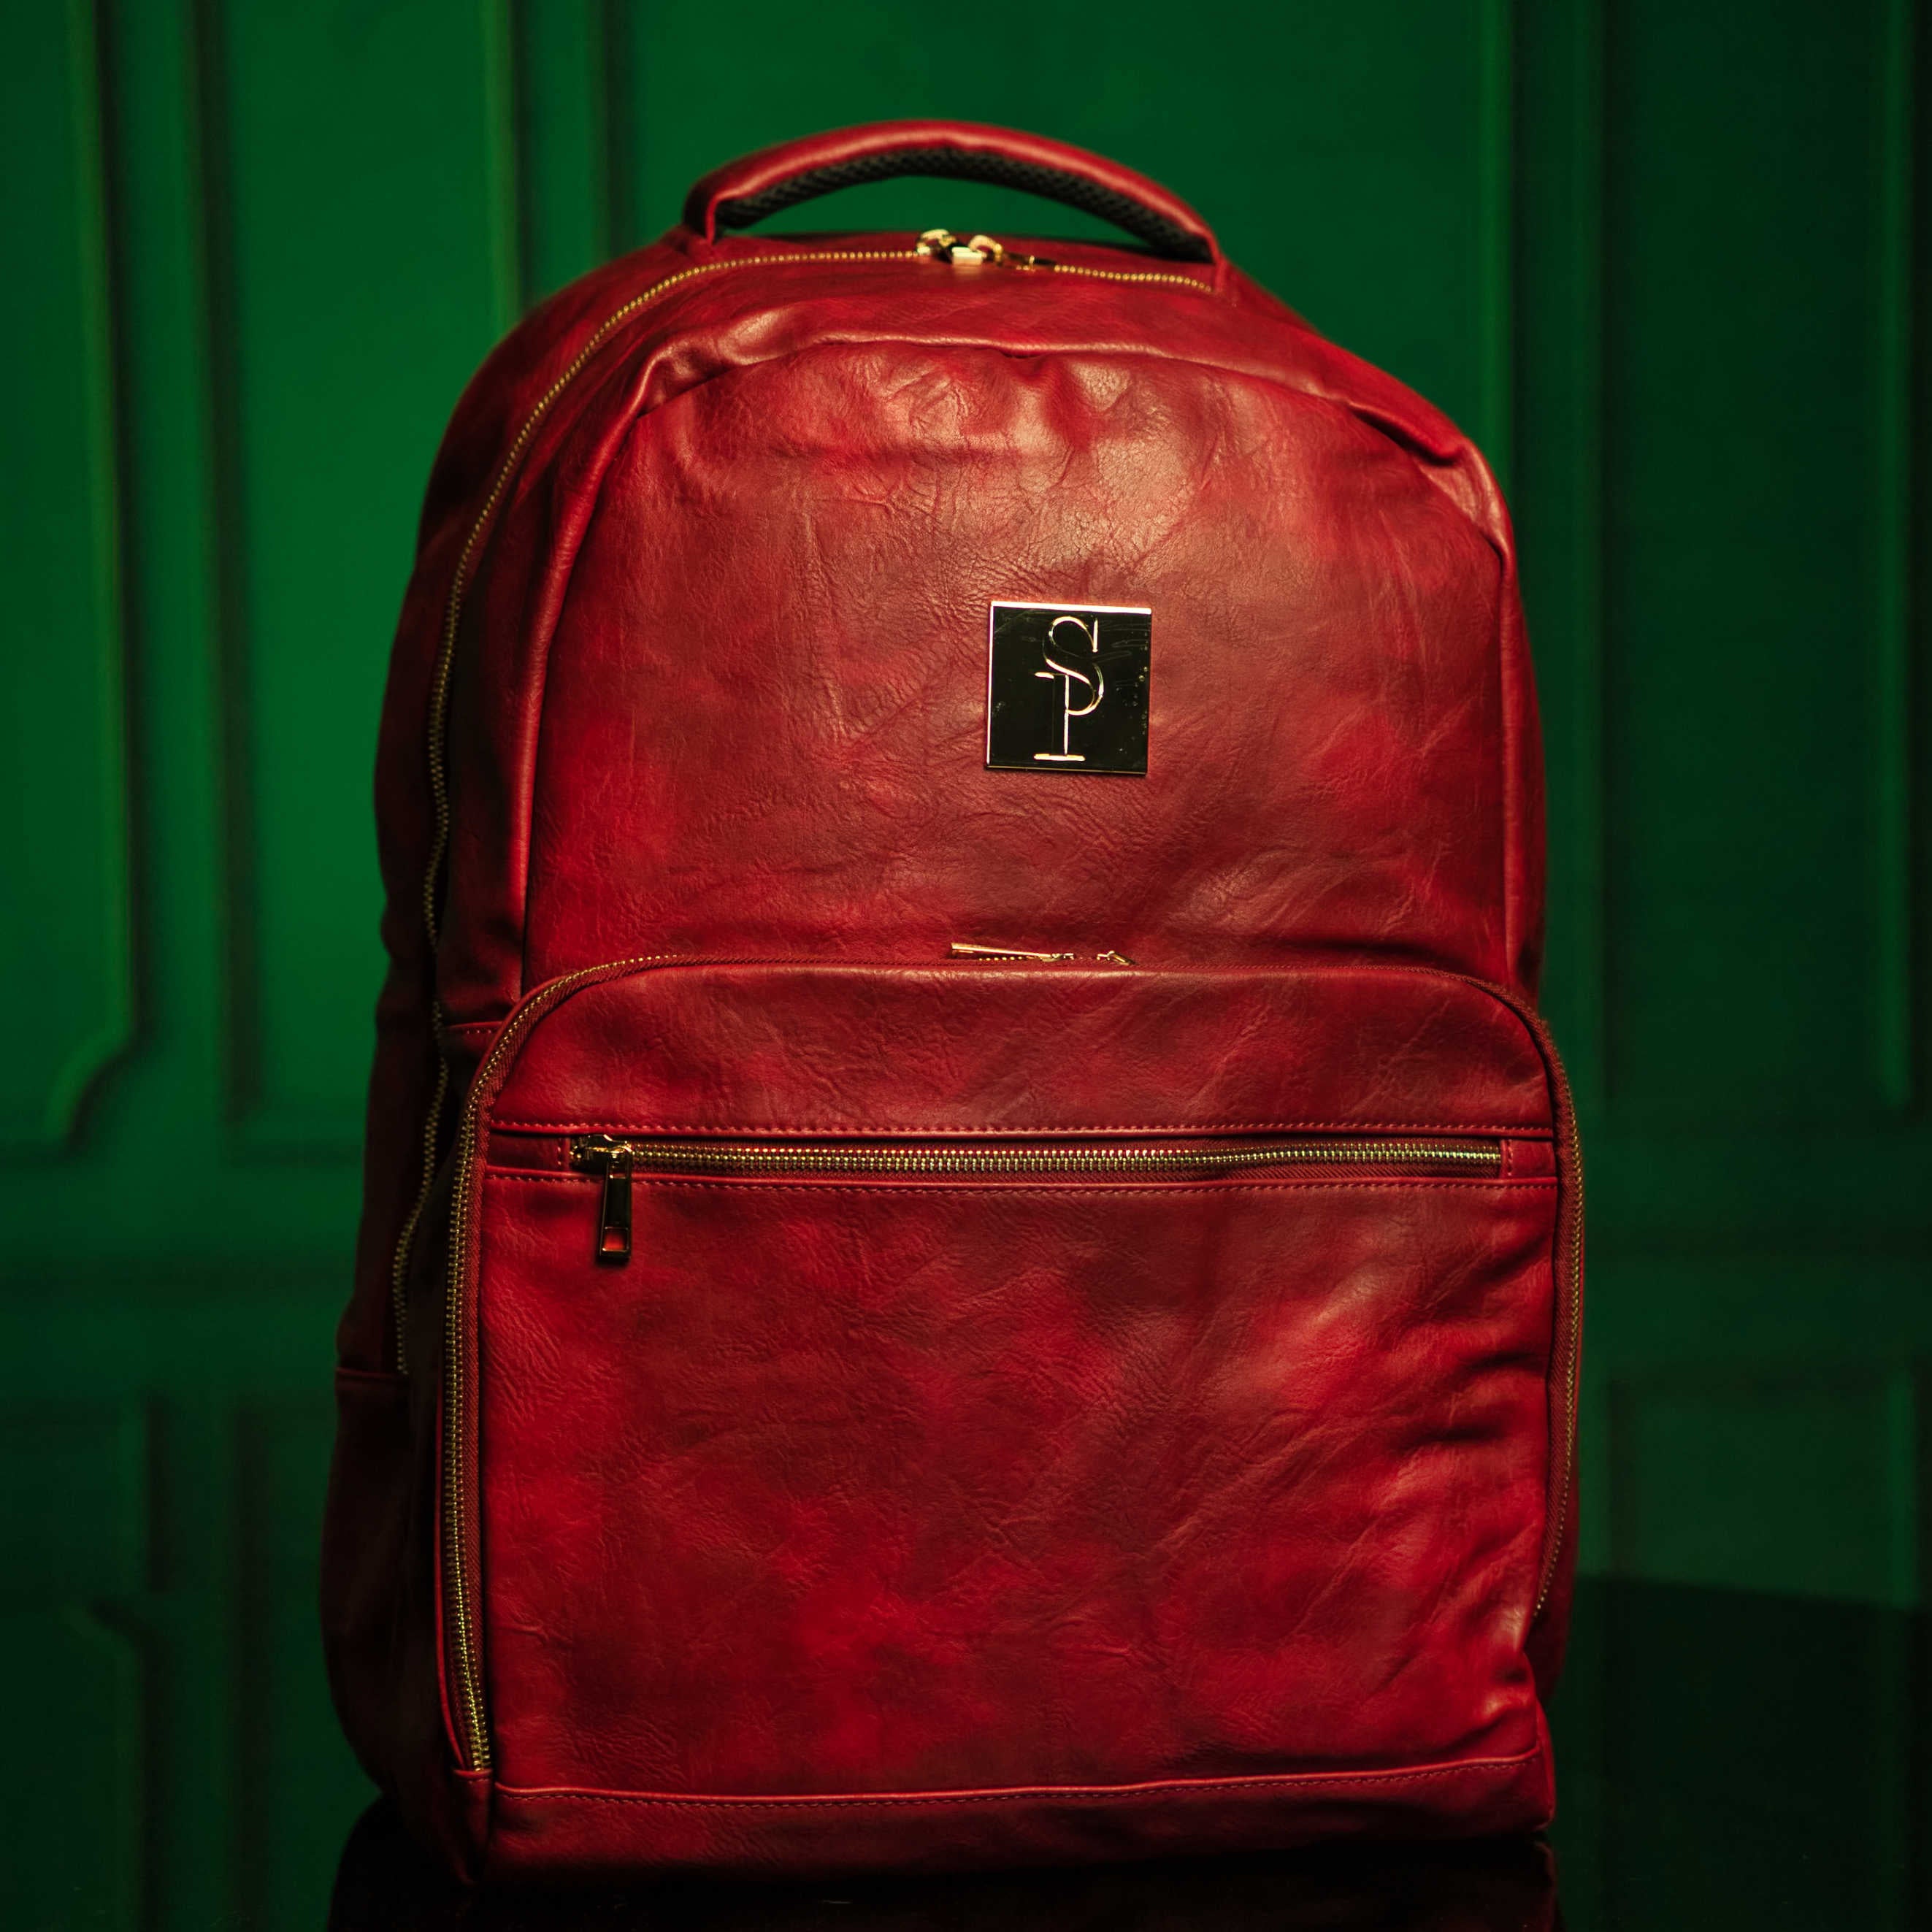 Maroon Tumbled Leather Commuter Bag - Sole Premise